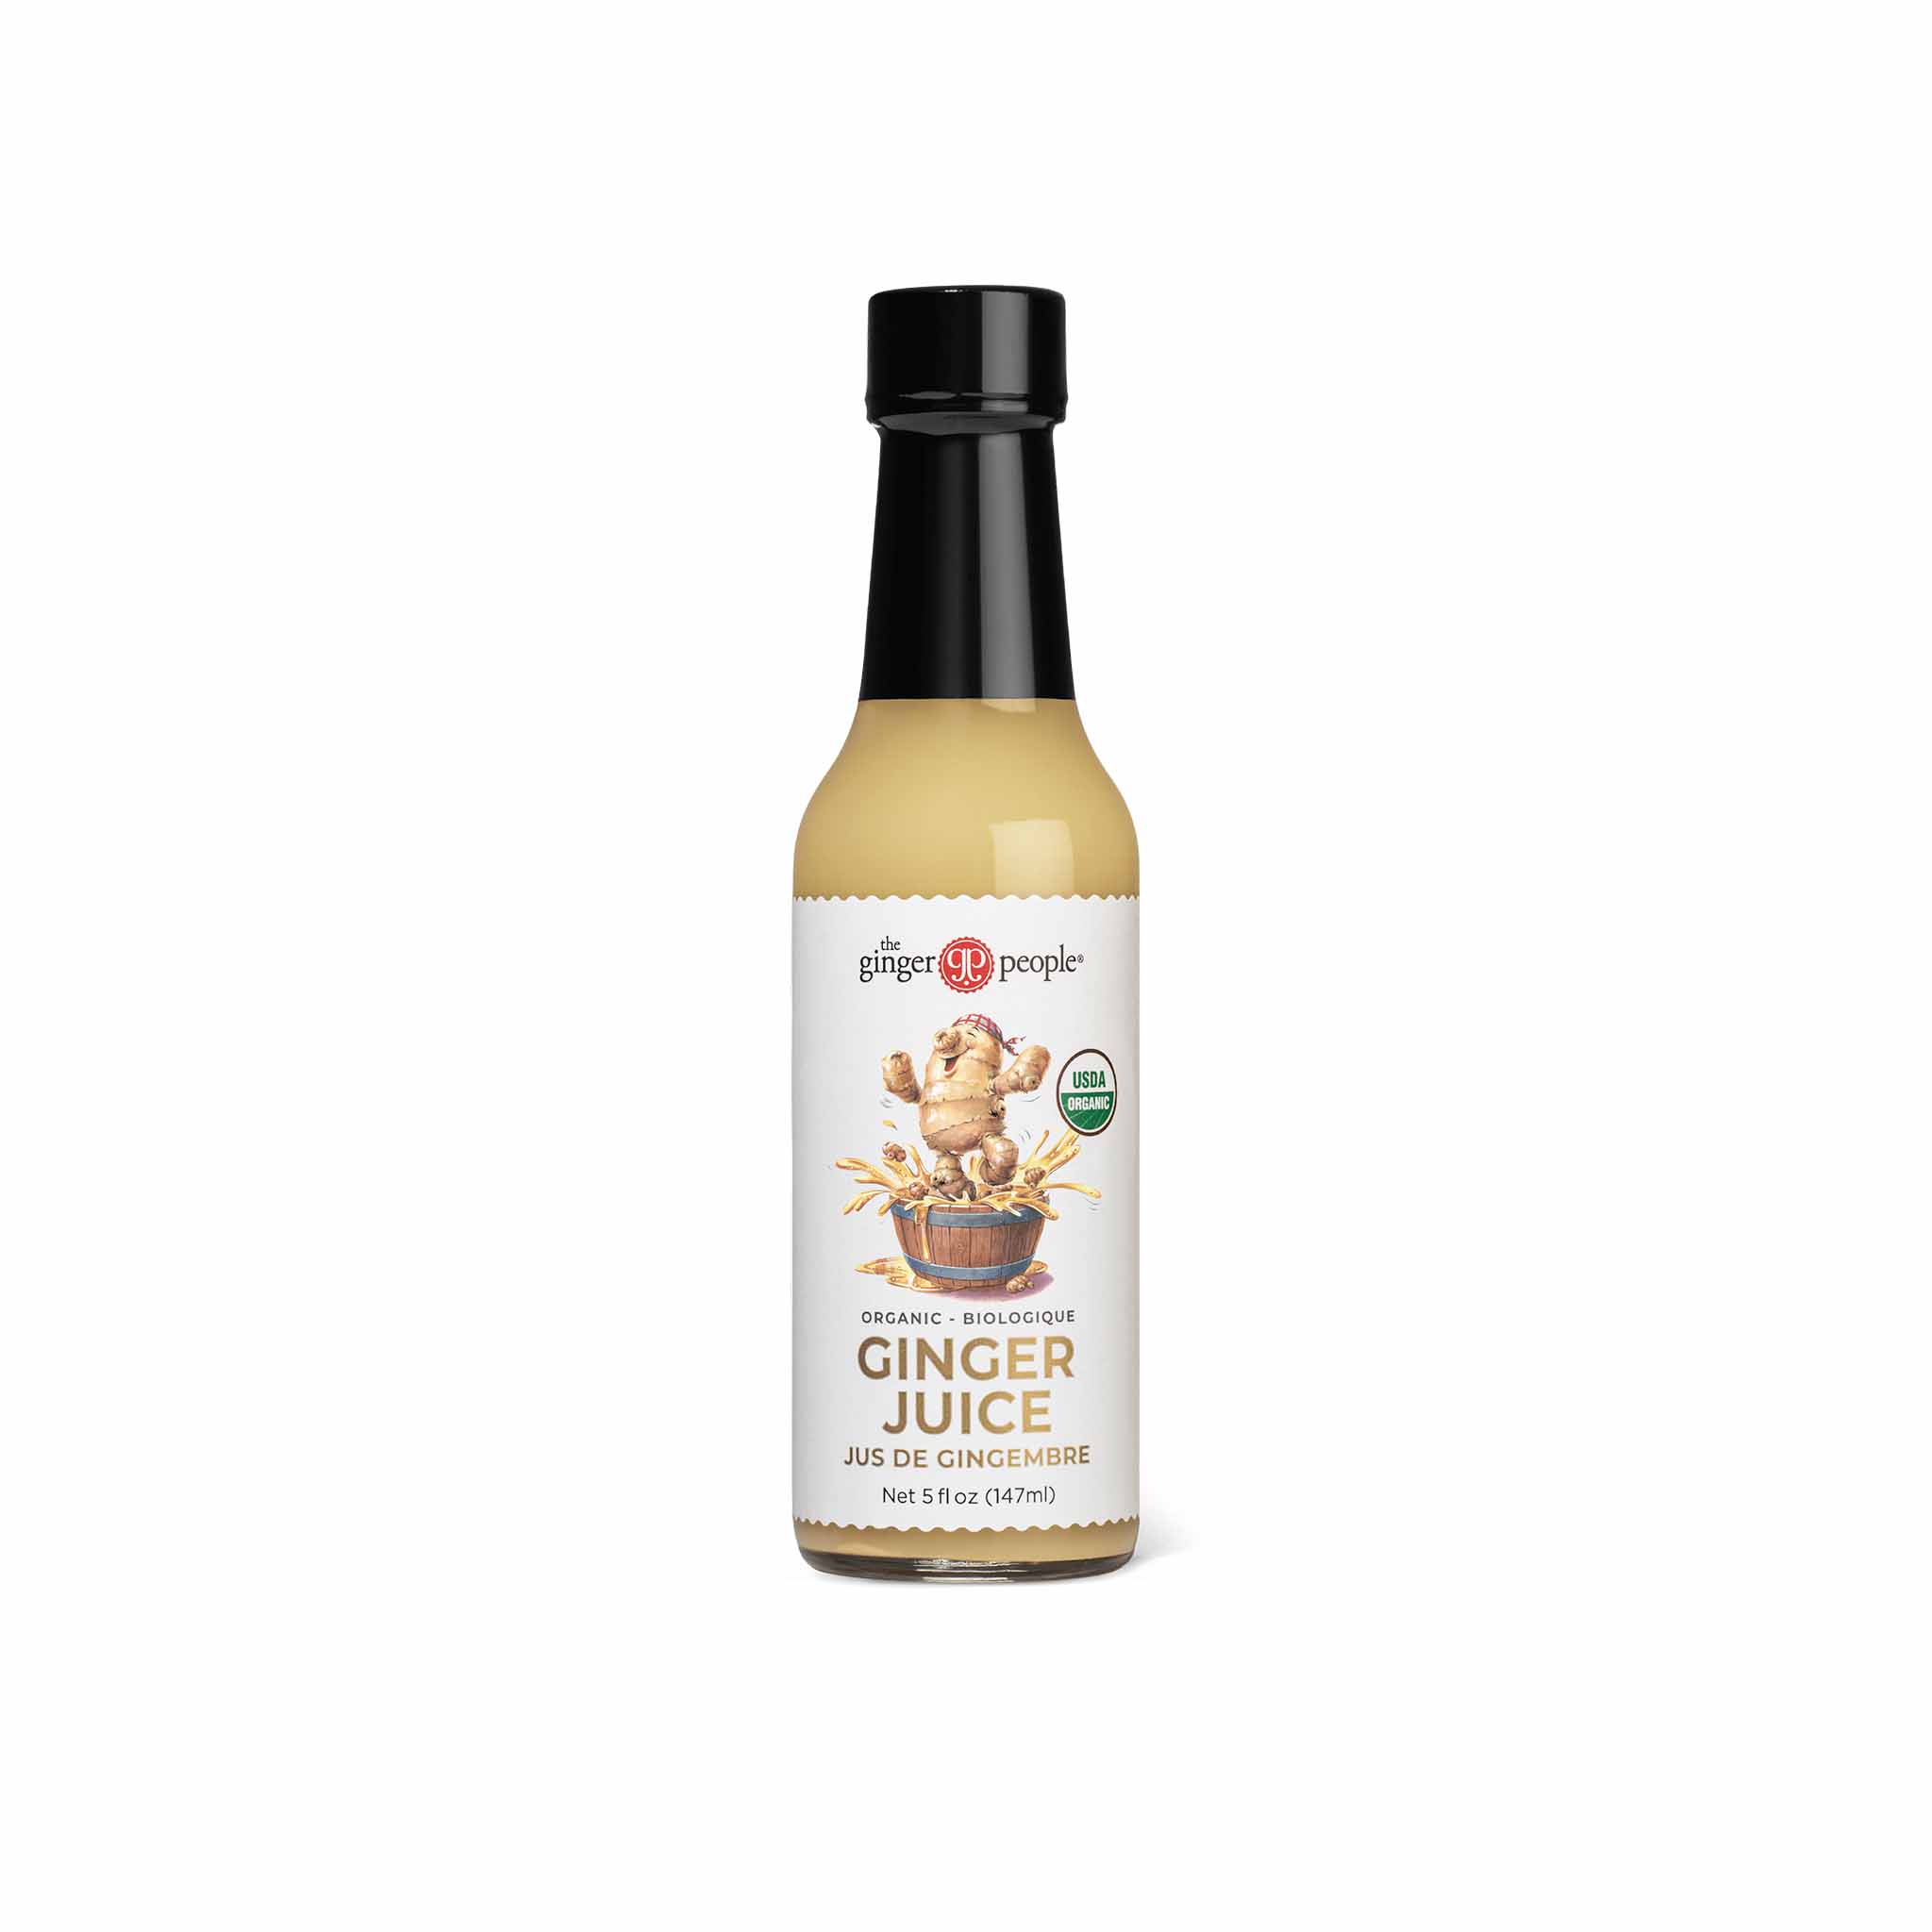 THE GINGER PEOPLE GINGER JUICE 5oz